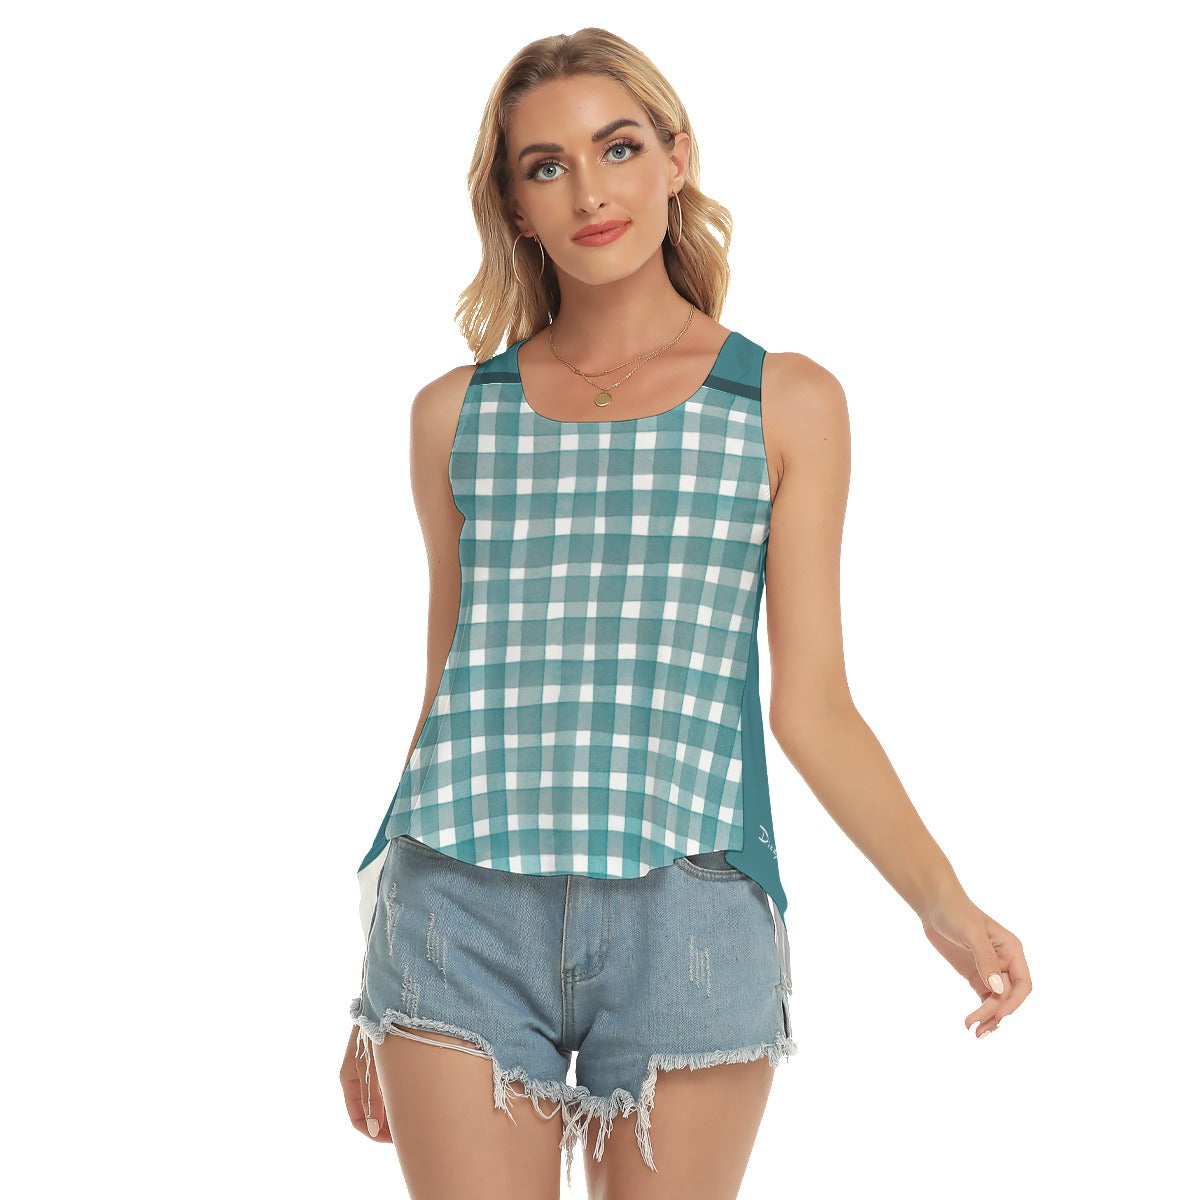 Heidi - TW - Gingham/Peacock - Pickleball Open-Backed Tank Top by Dizzy Pickle